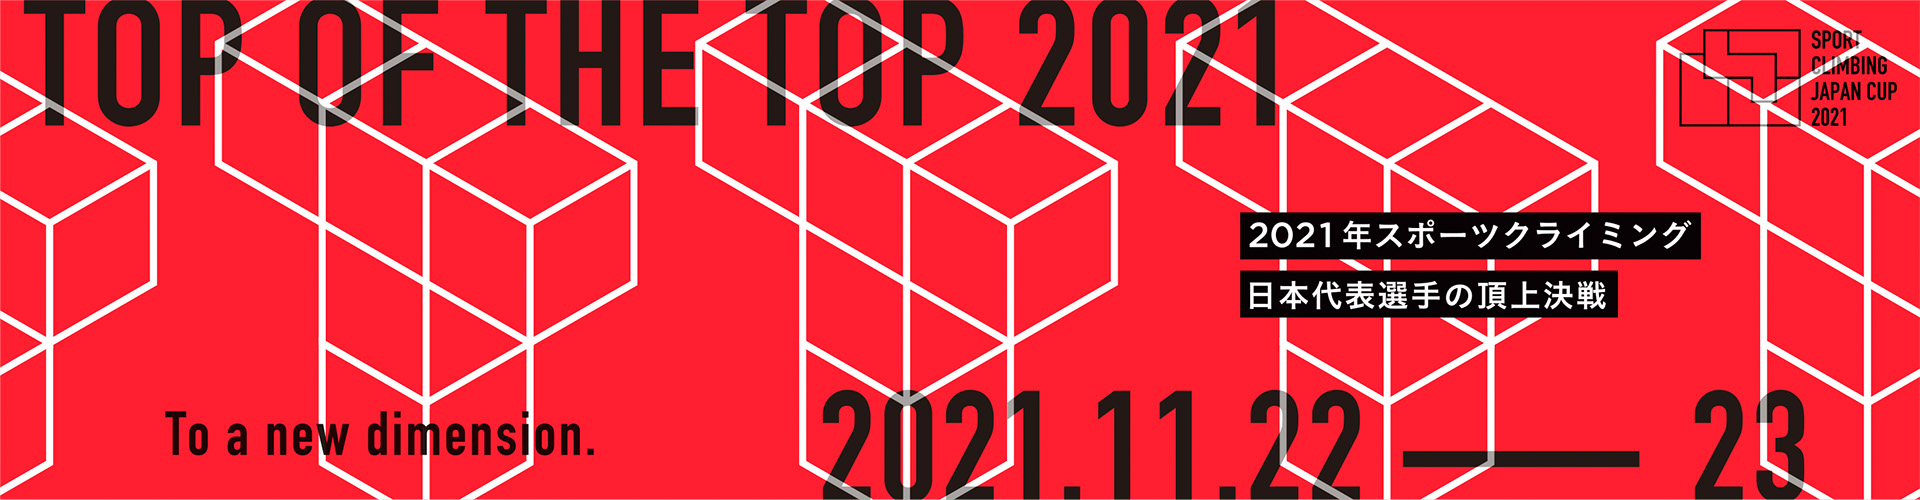 Top of the Top 2021ロゴ